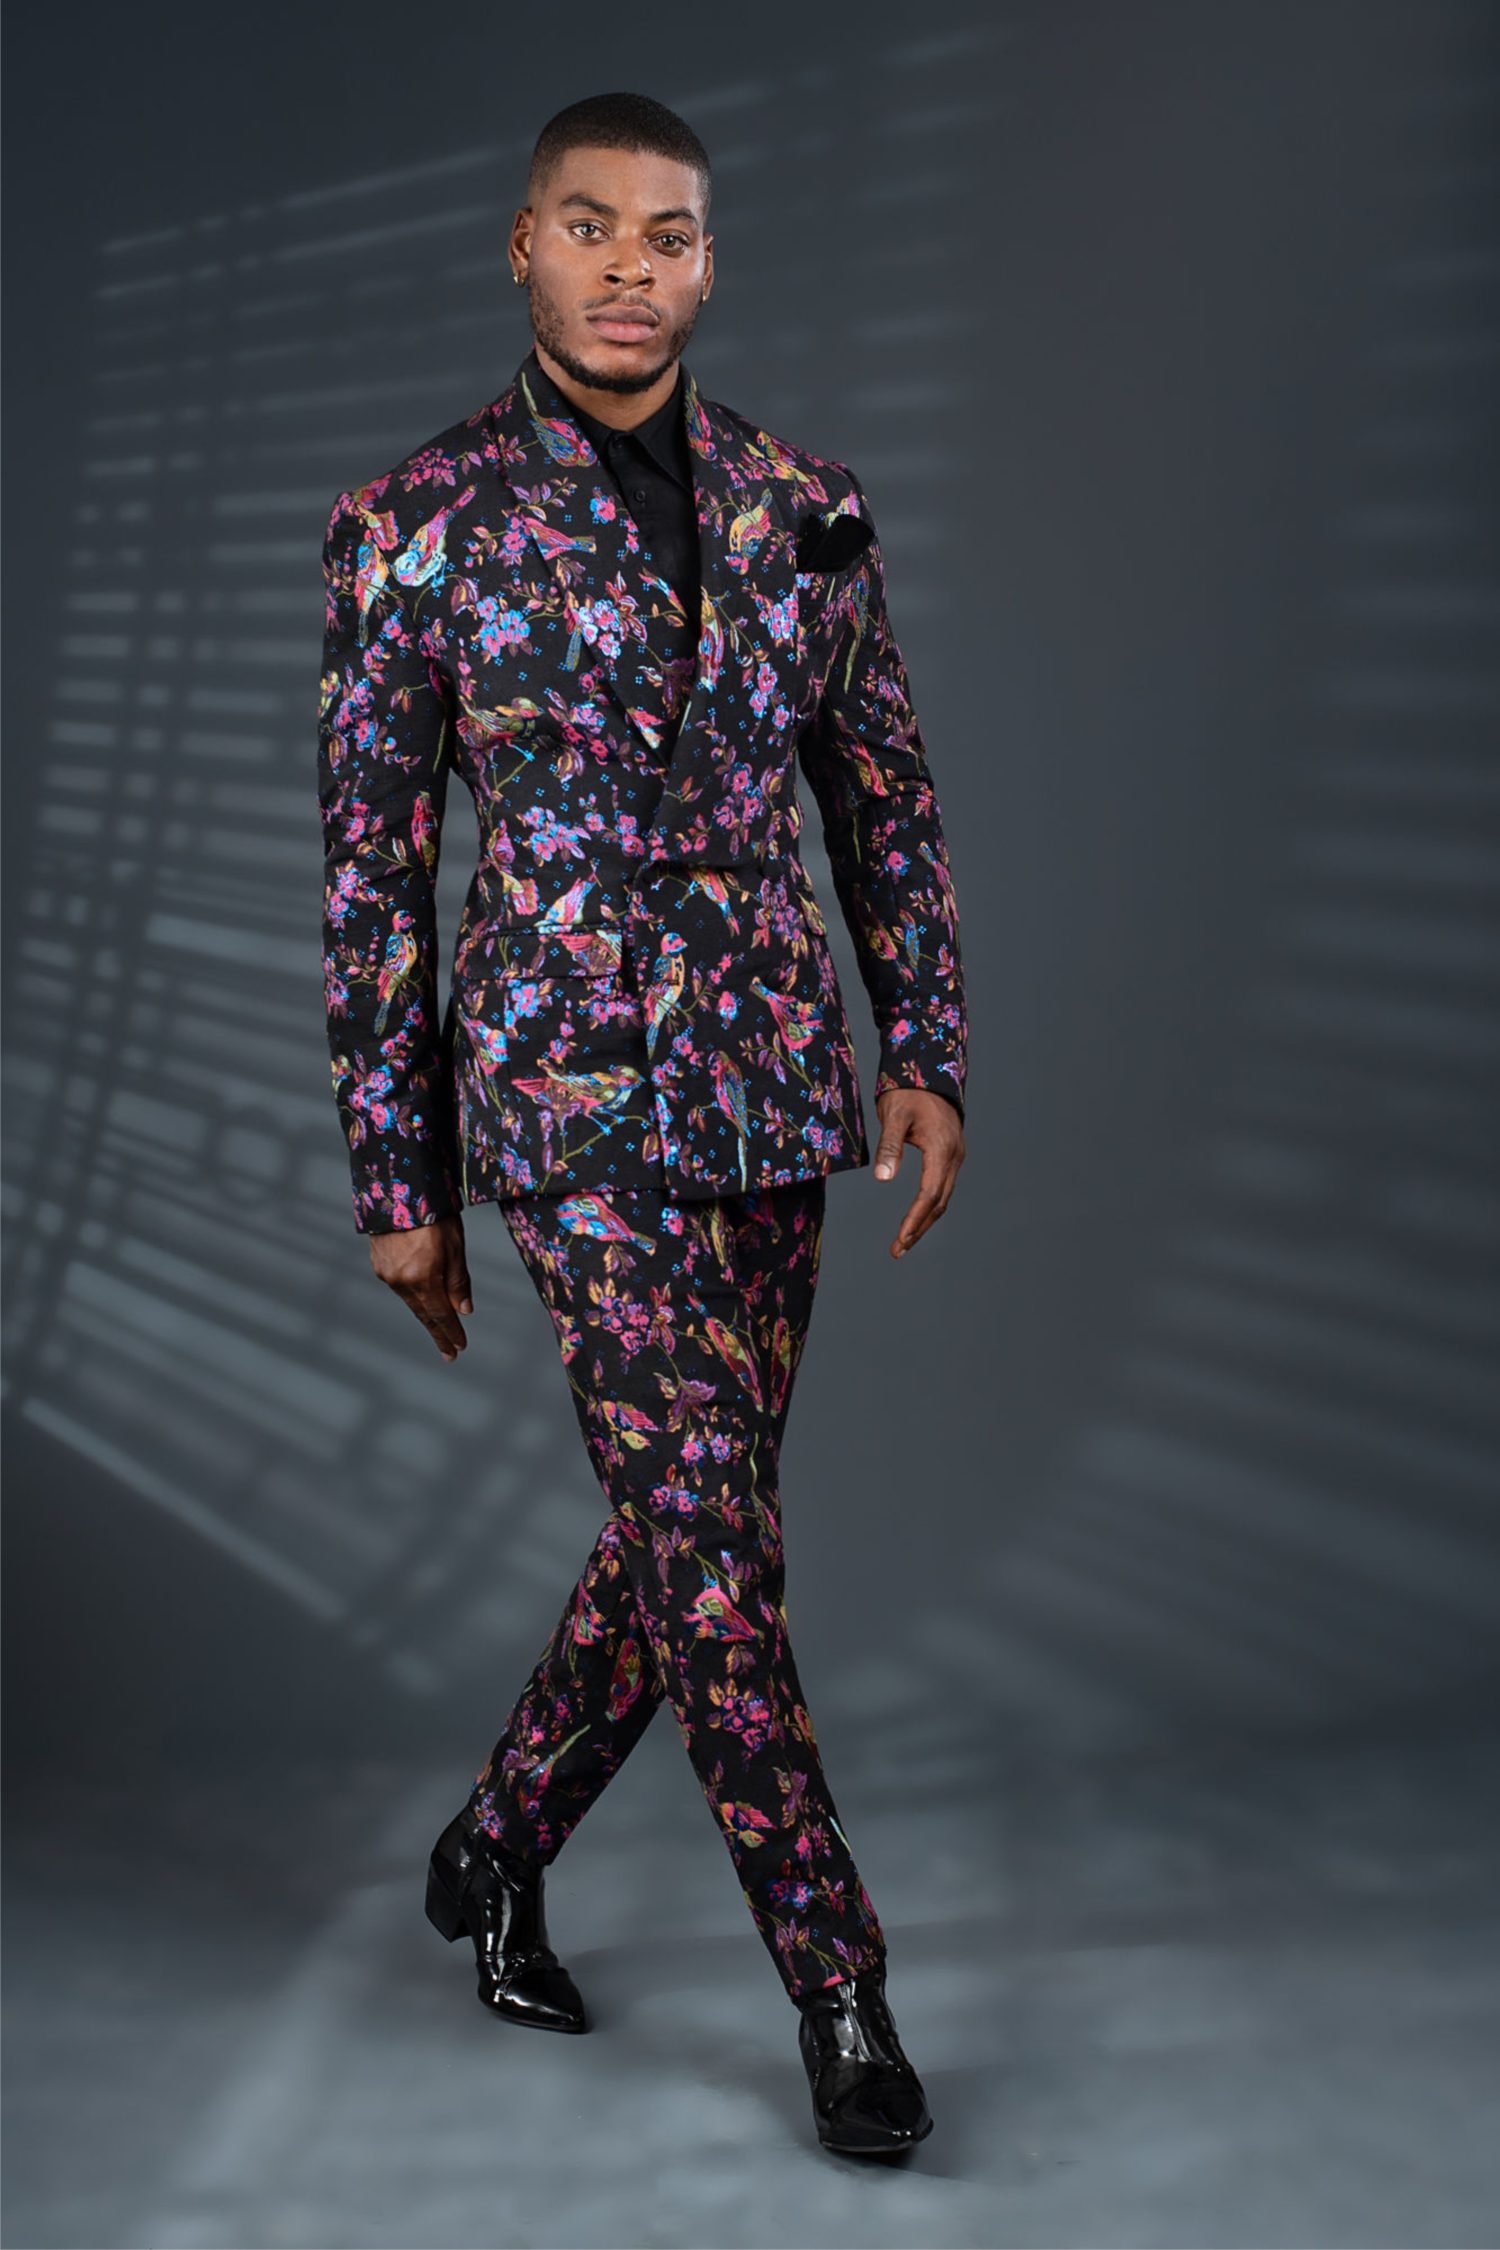 Ladies, Telvin Nwafor’s “Emerging” Collection is for the Stylish Man in Your Life